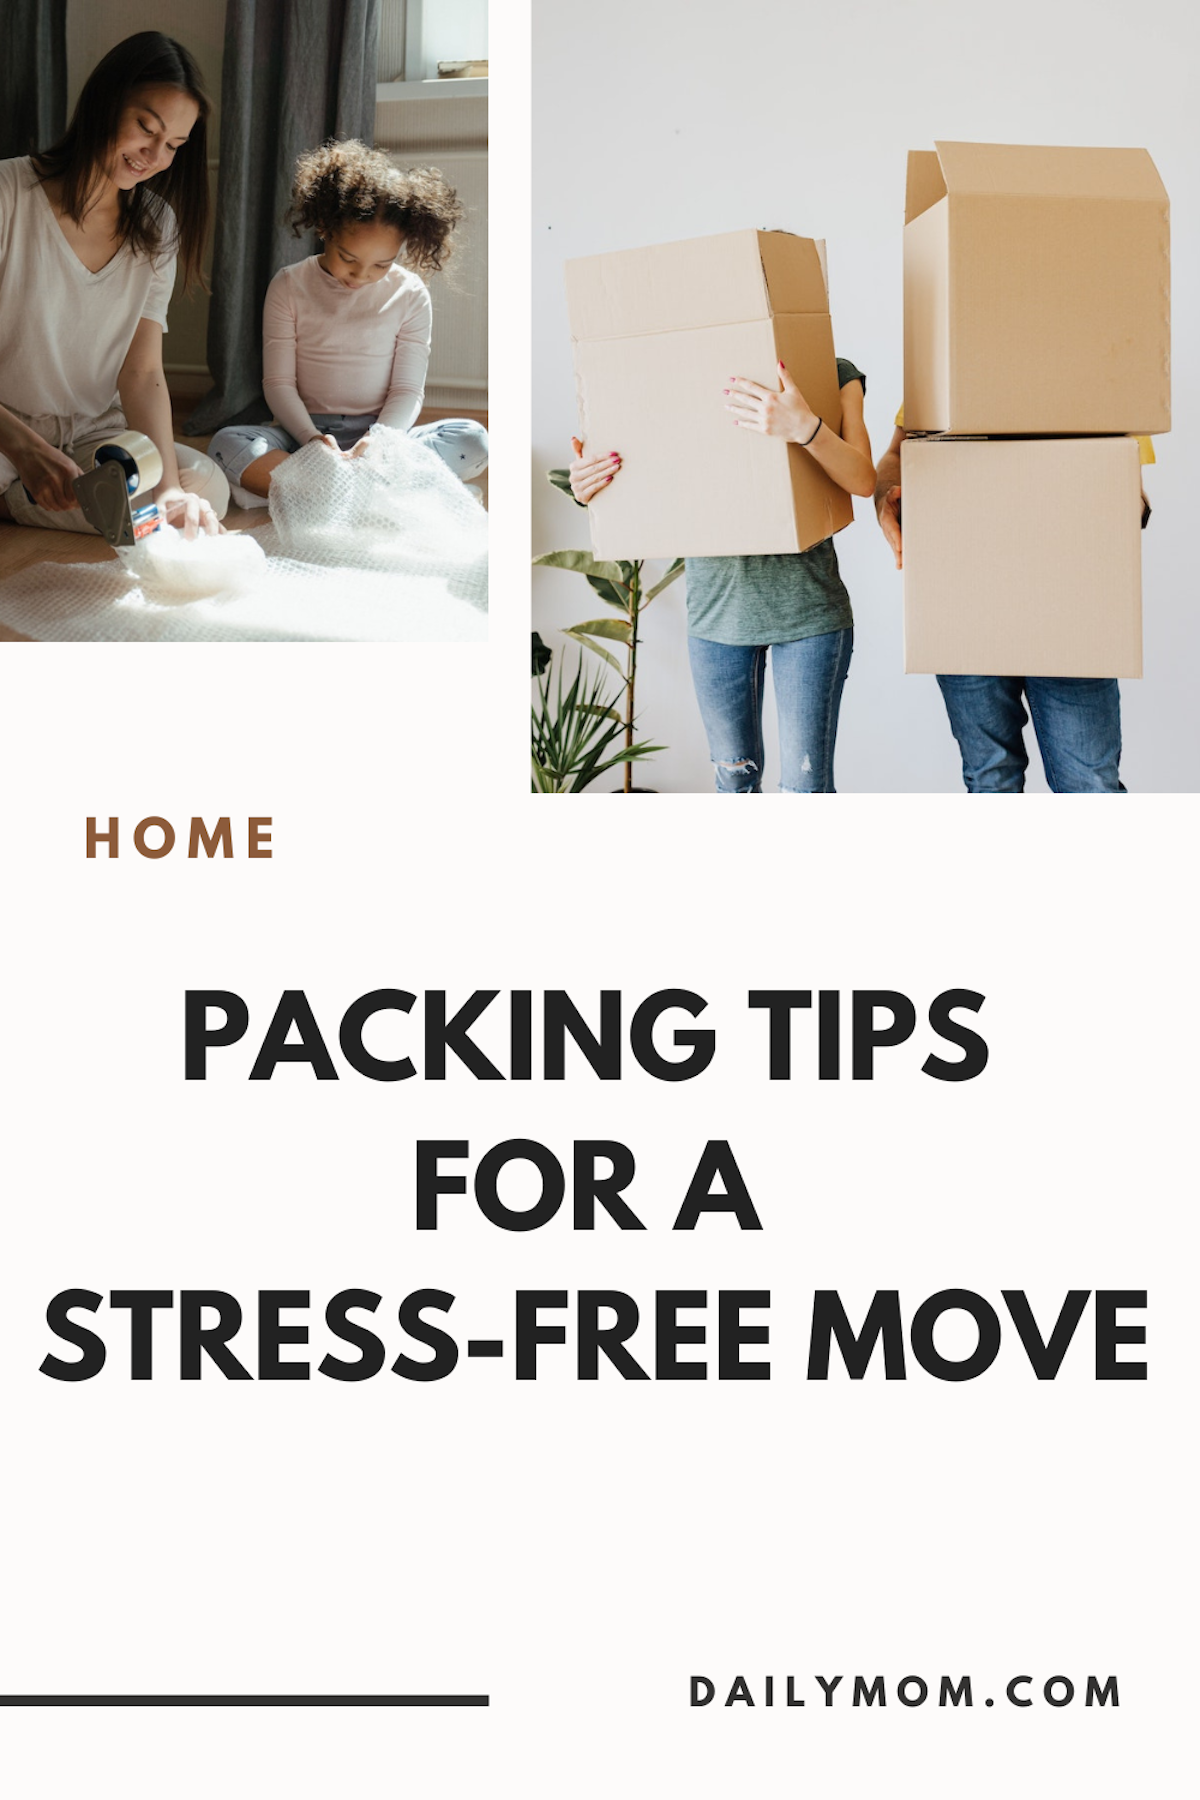 Daily Mom Parent Portal How To Pack To Move